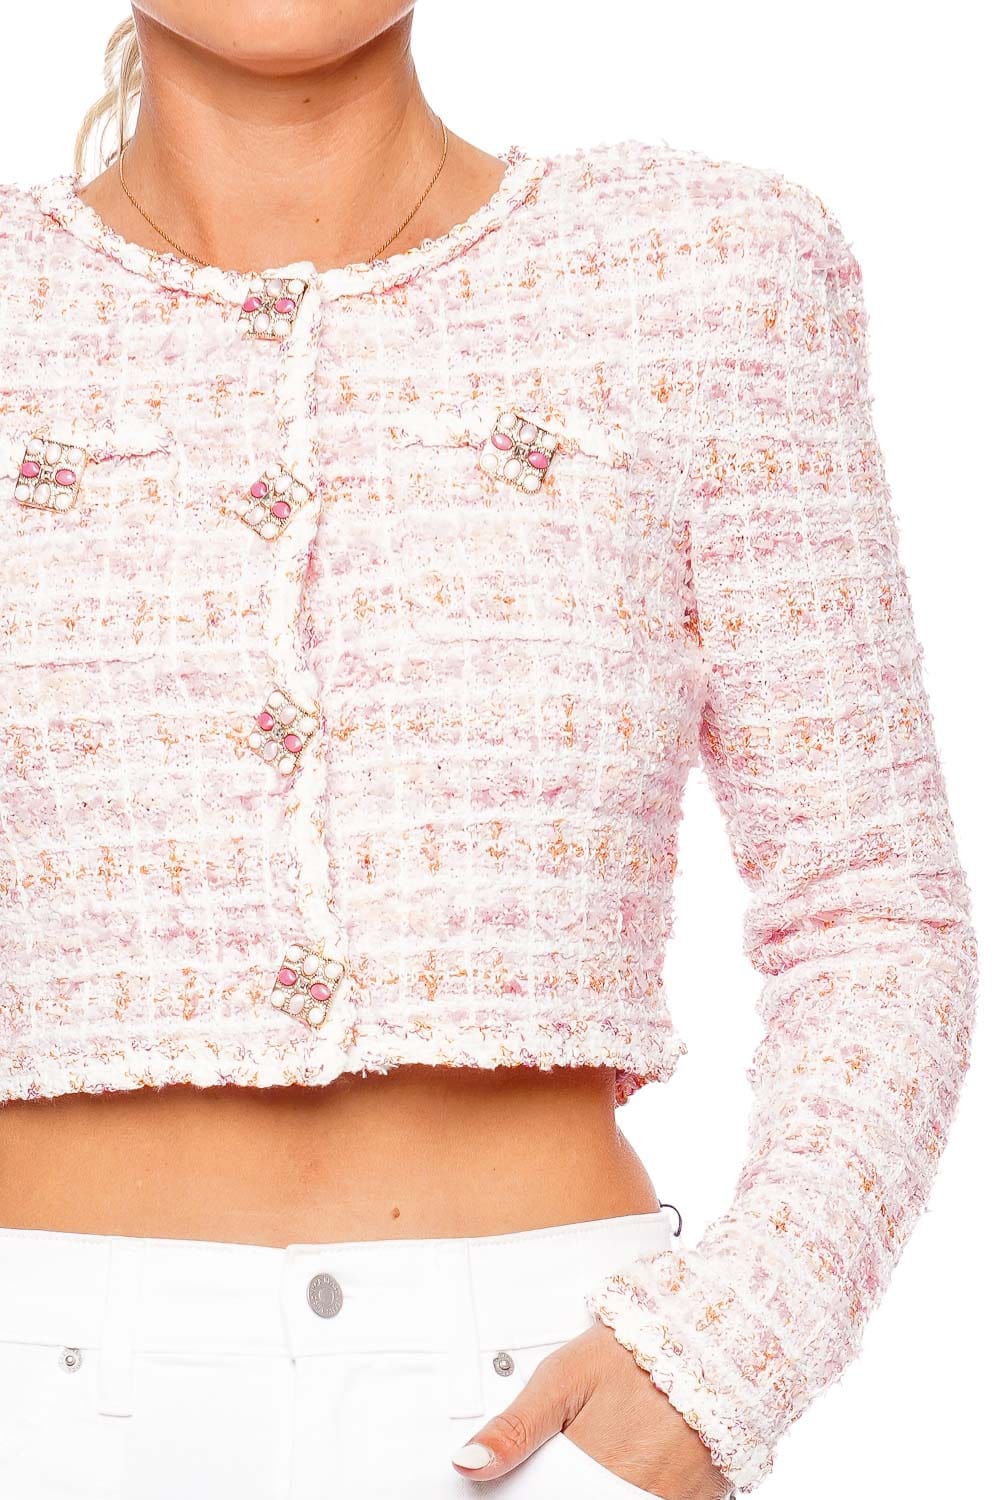 self-portrait Pink Check Cropped Knit Cardigan